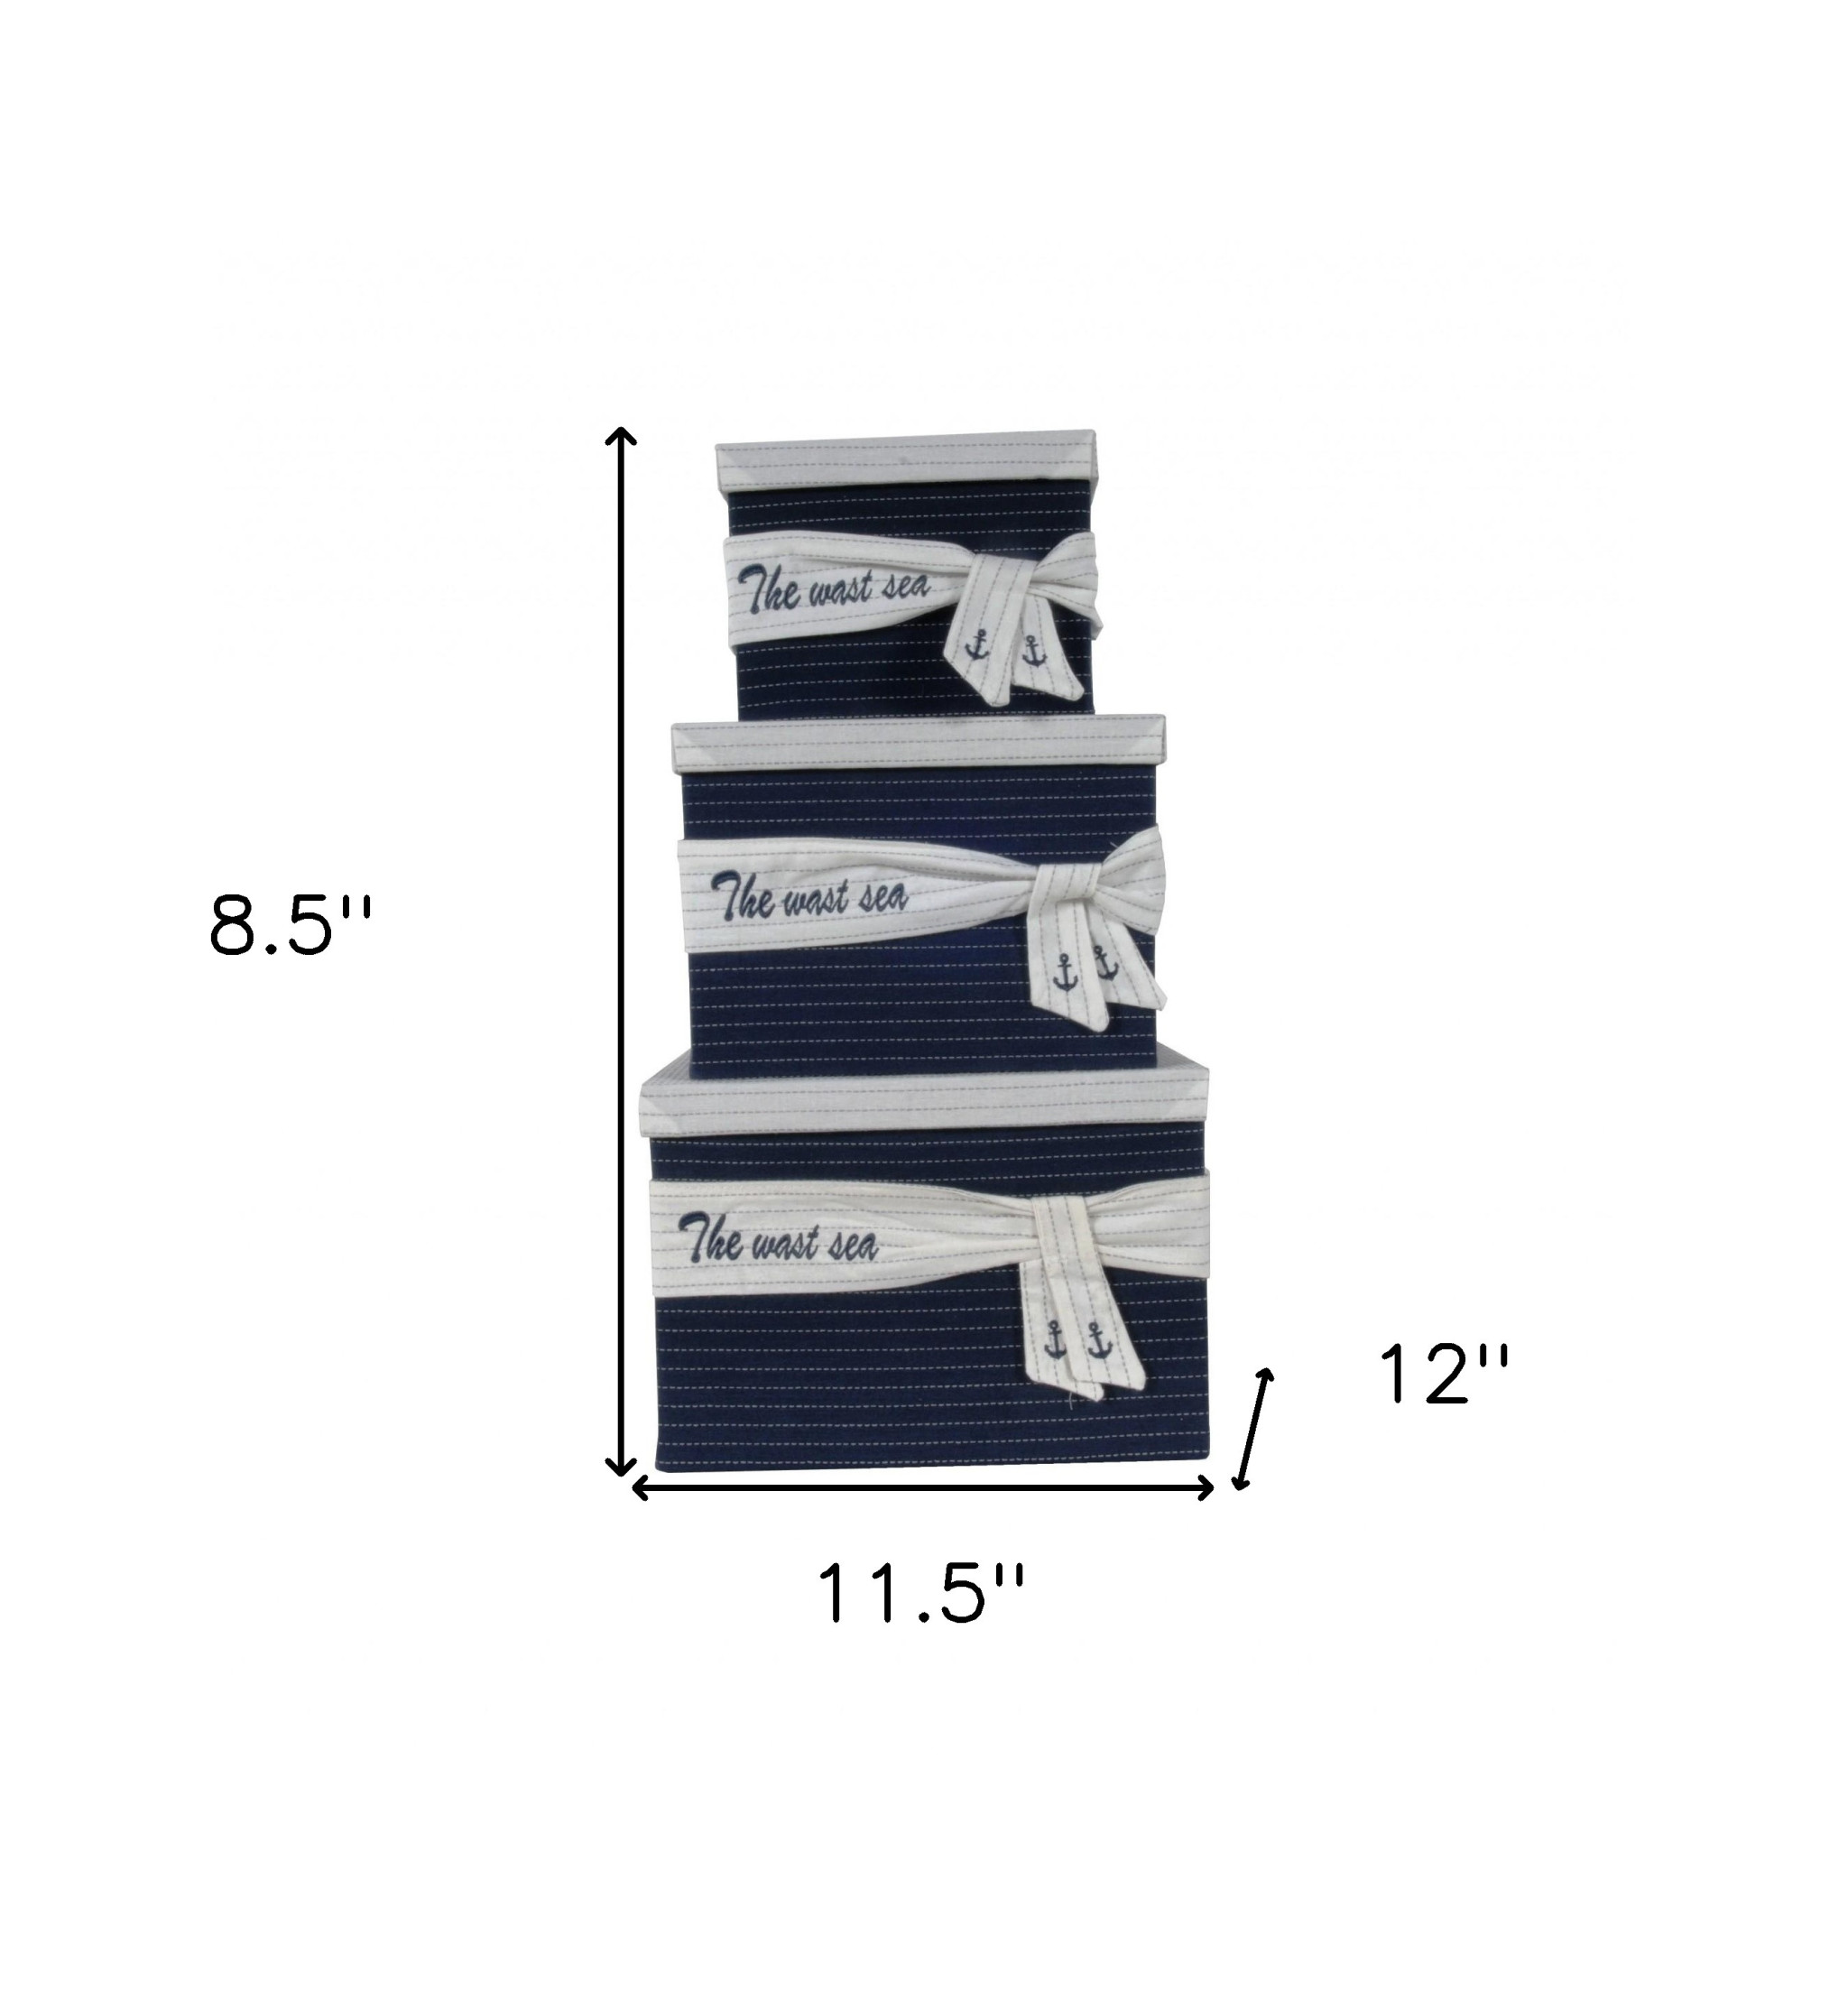 11.5" x 12" x 8.5" White, Blue, Fabric -Boxes With Cover Set of 3